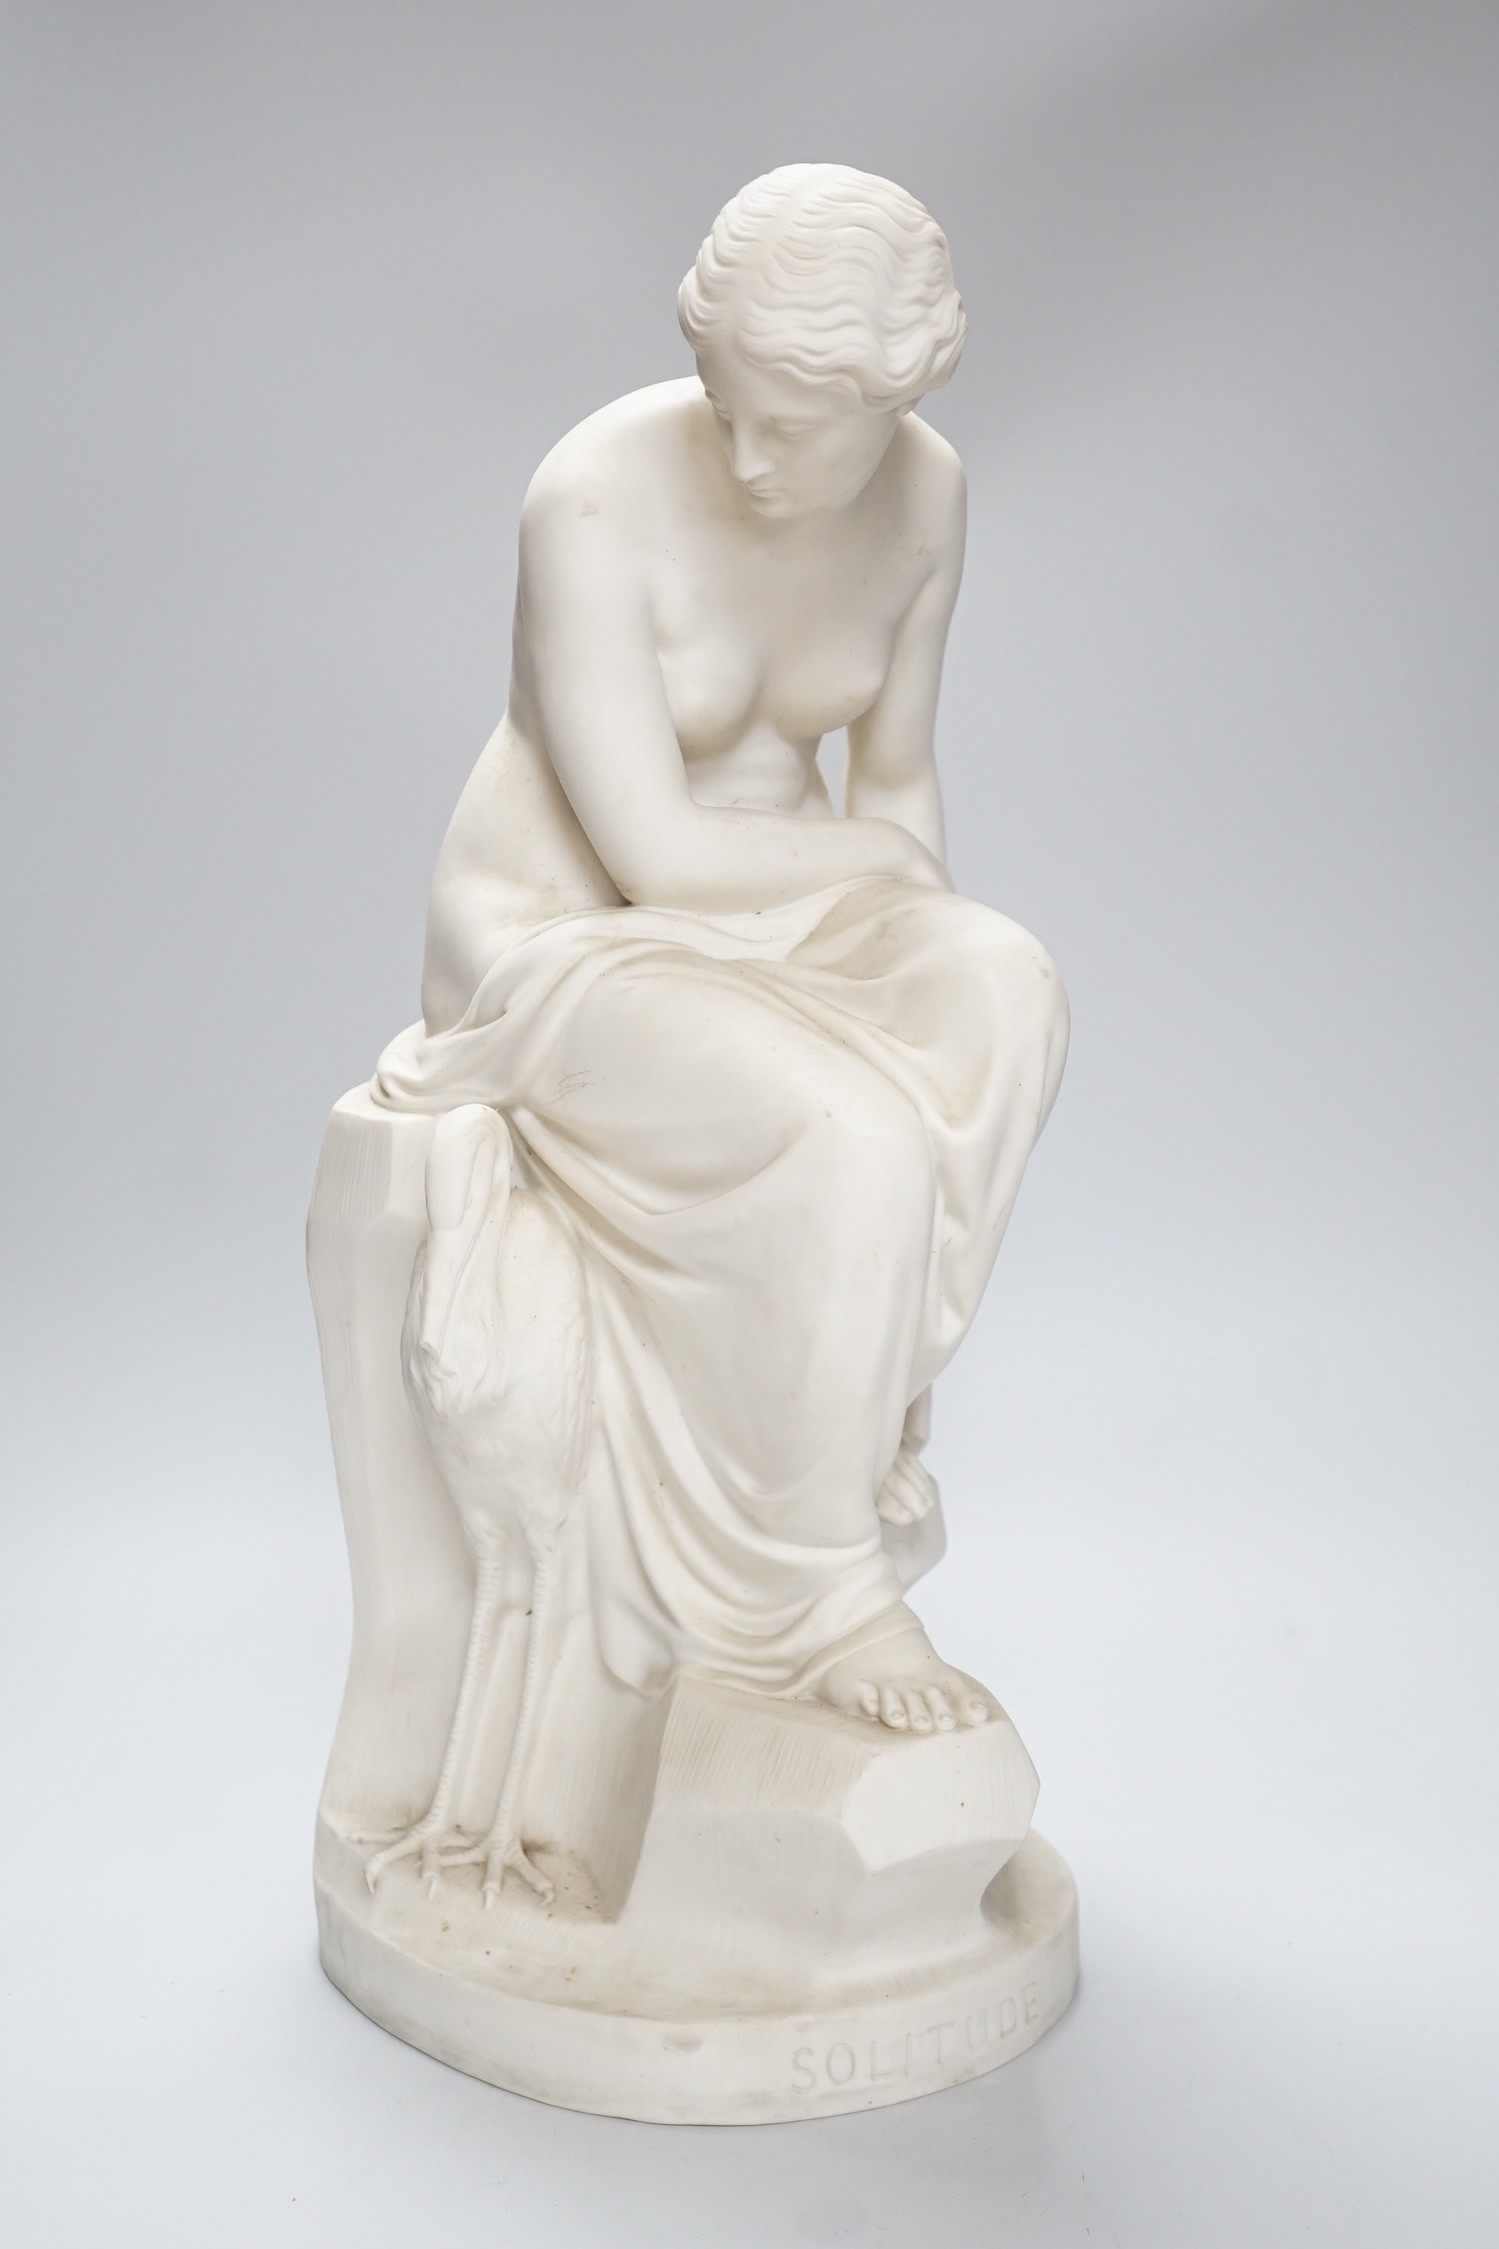 A Mintons Parian figure, Solitude, issued by the Art Union of London, after the original by John Lawlor, dated 1852, 47cm